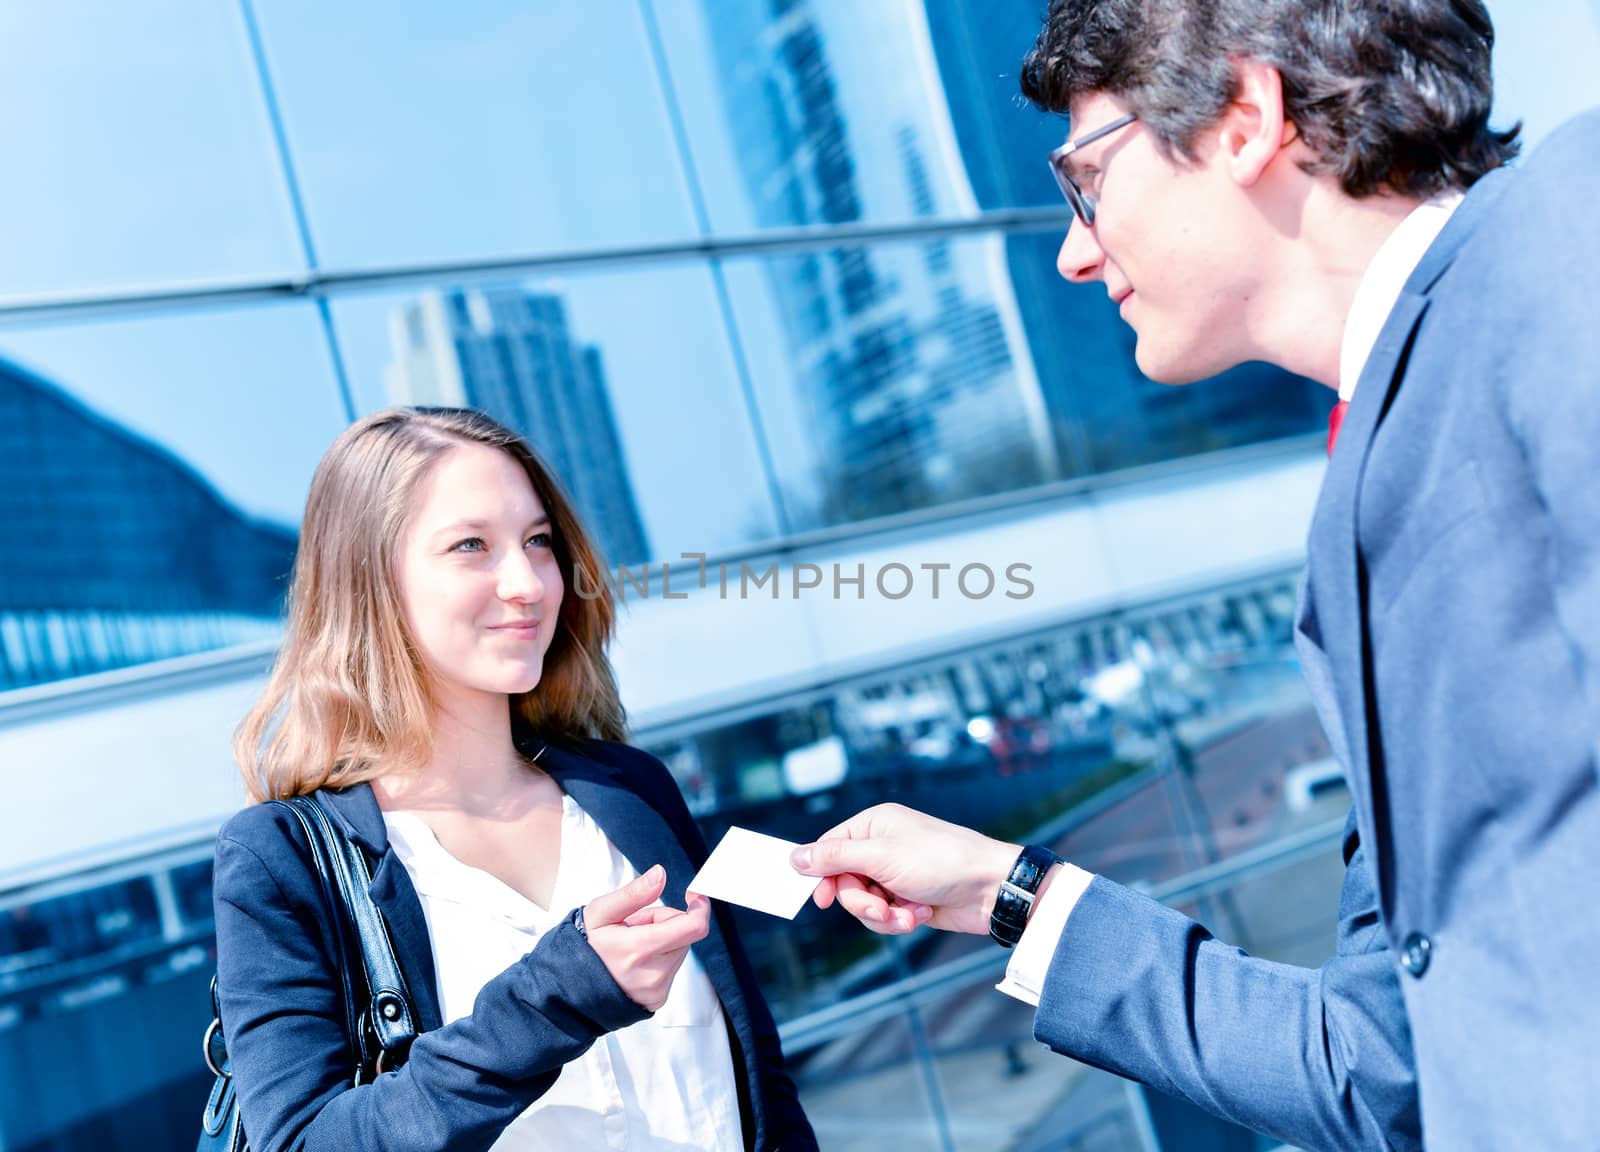 Junior executives dynamics exchange their business cards in front buildings